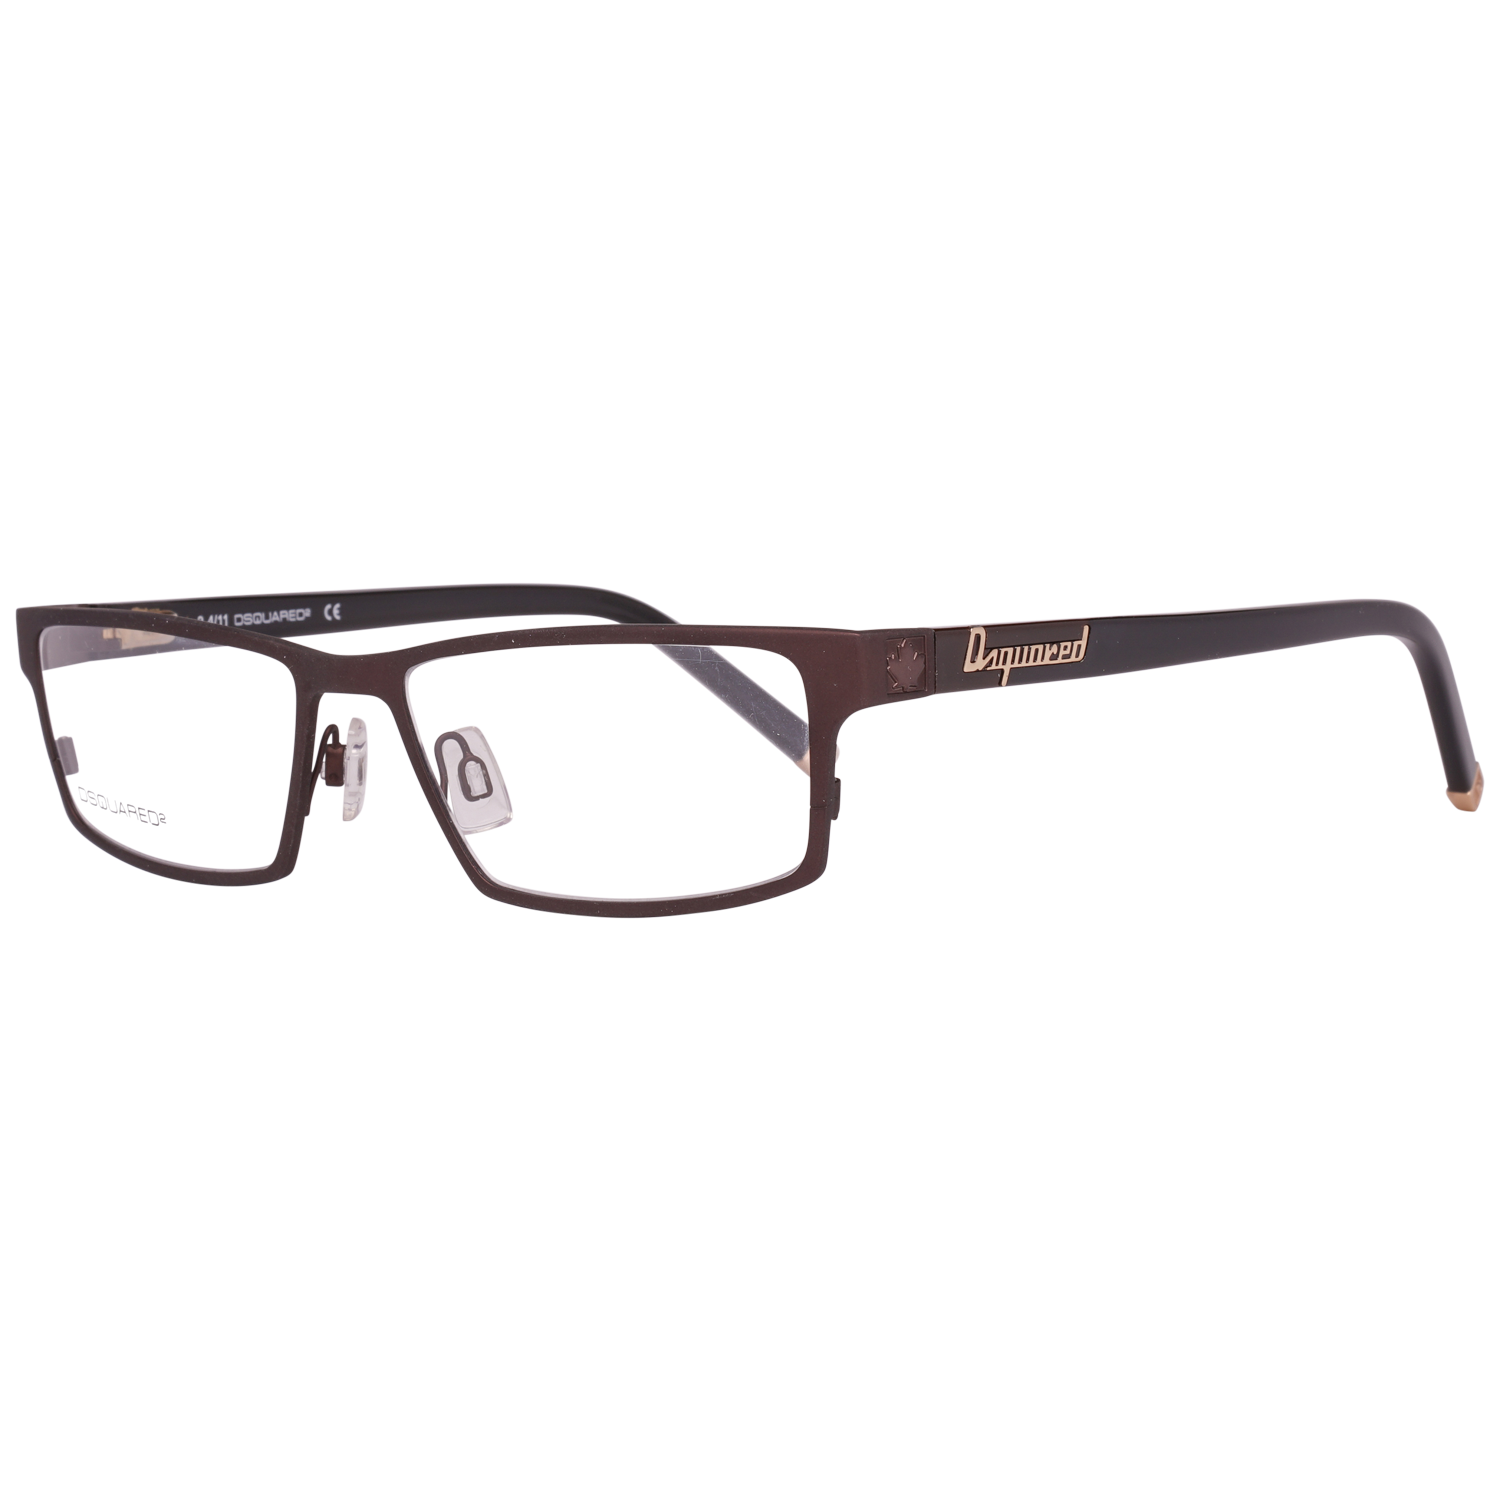 Dsquared2 Optical Frame DQ5070 049 54